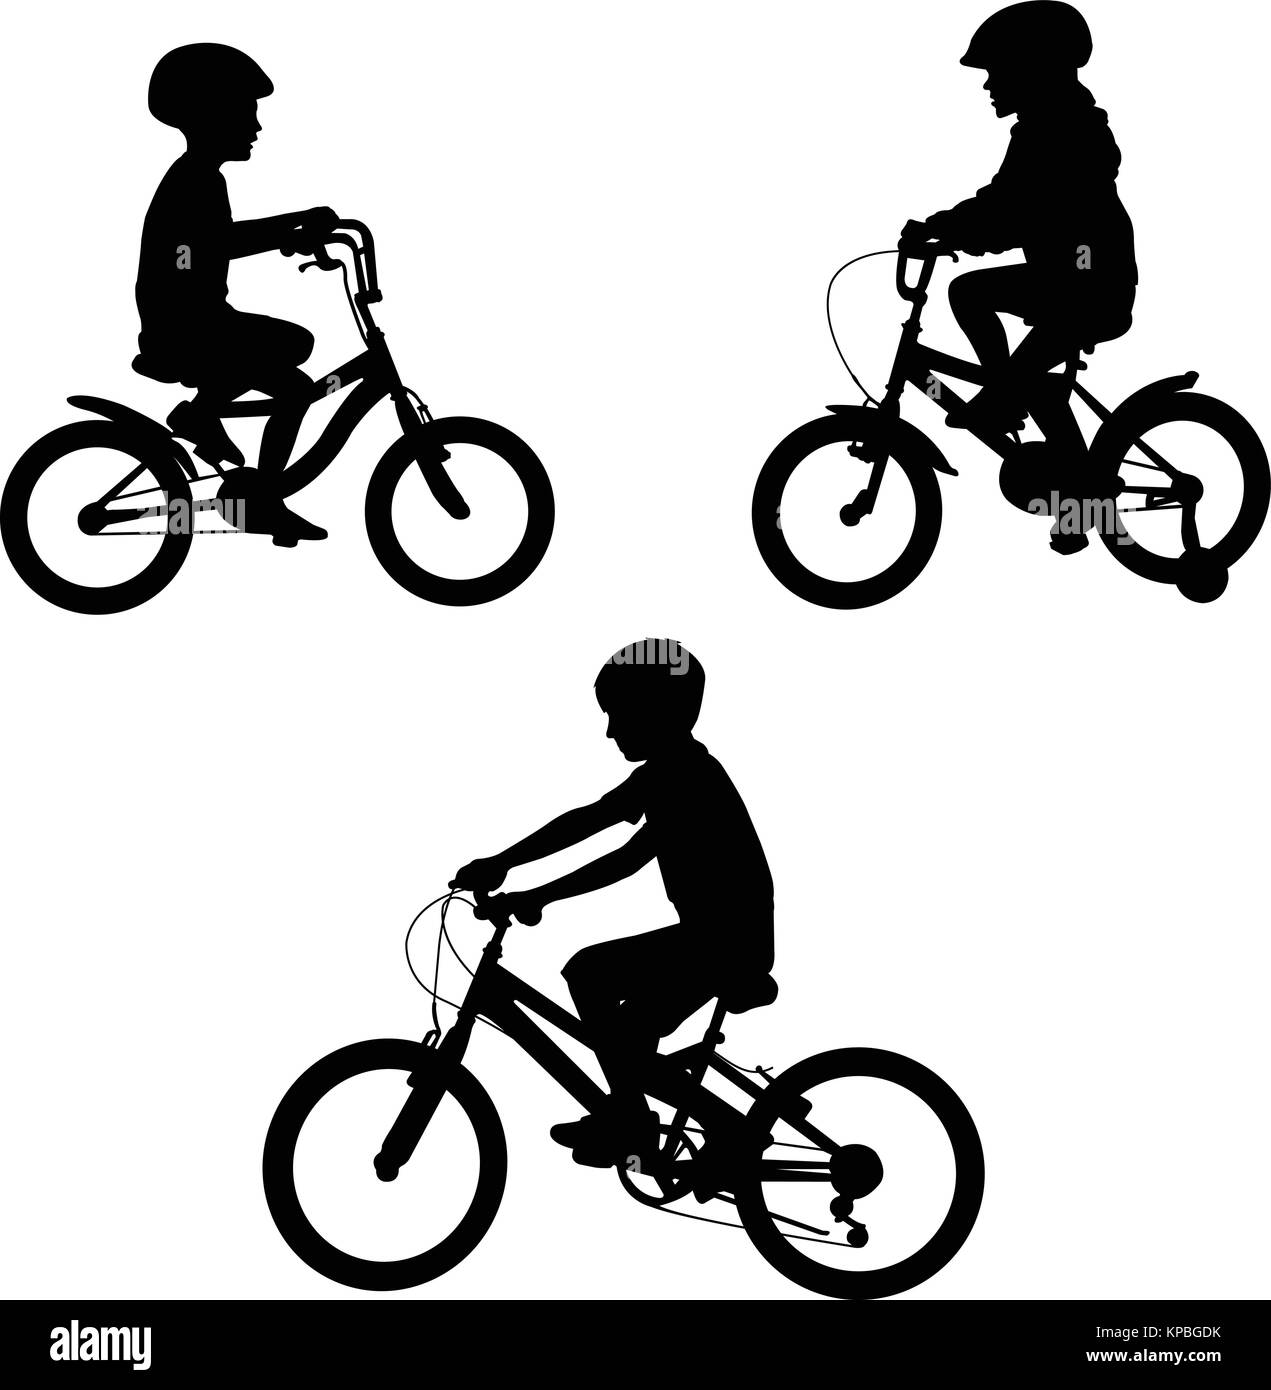 kids riding bicycles silhouettes - vector Stock Vector